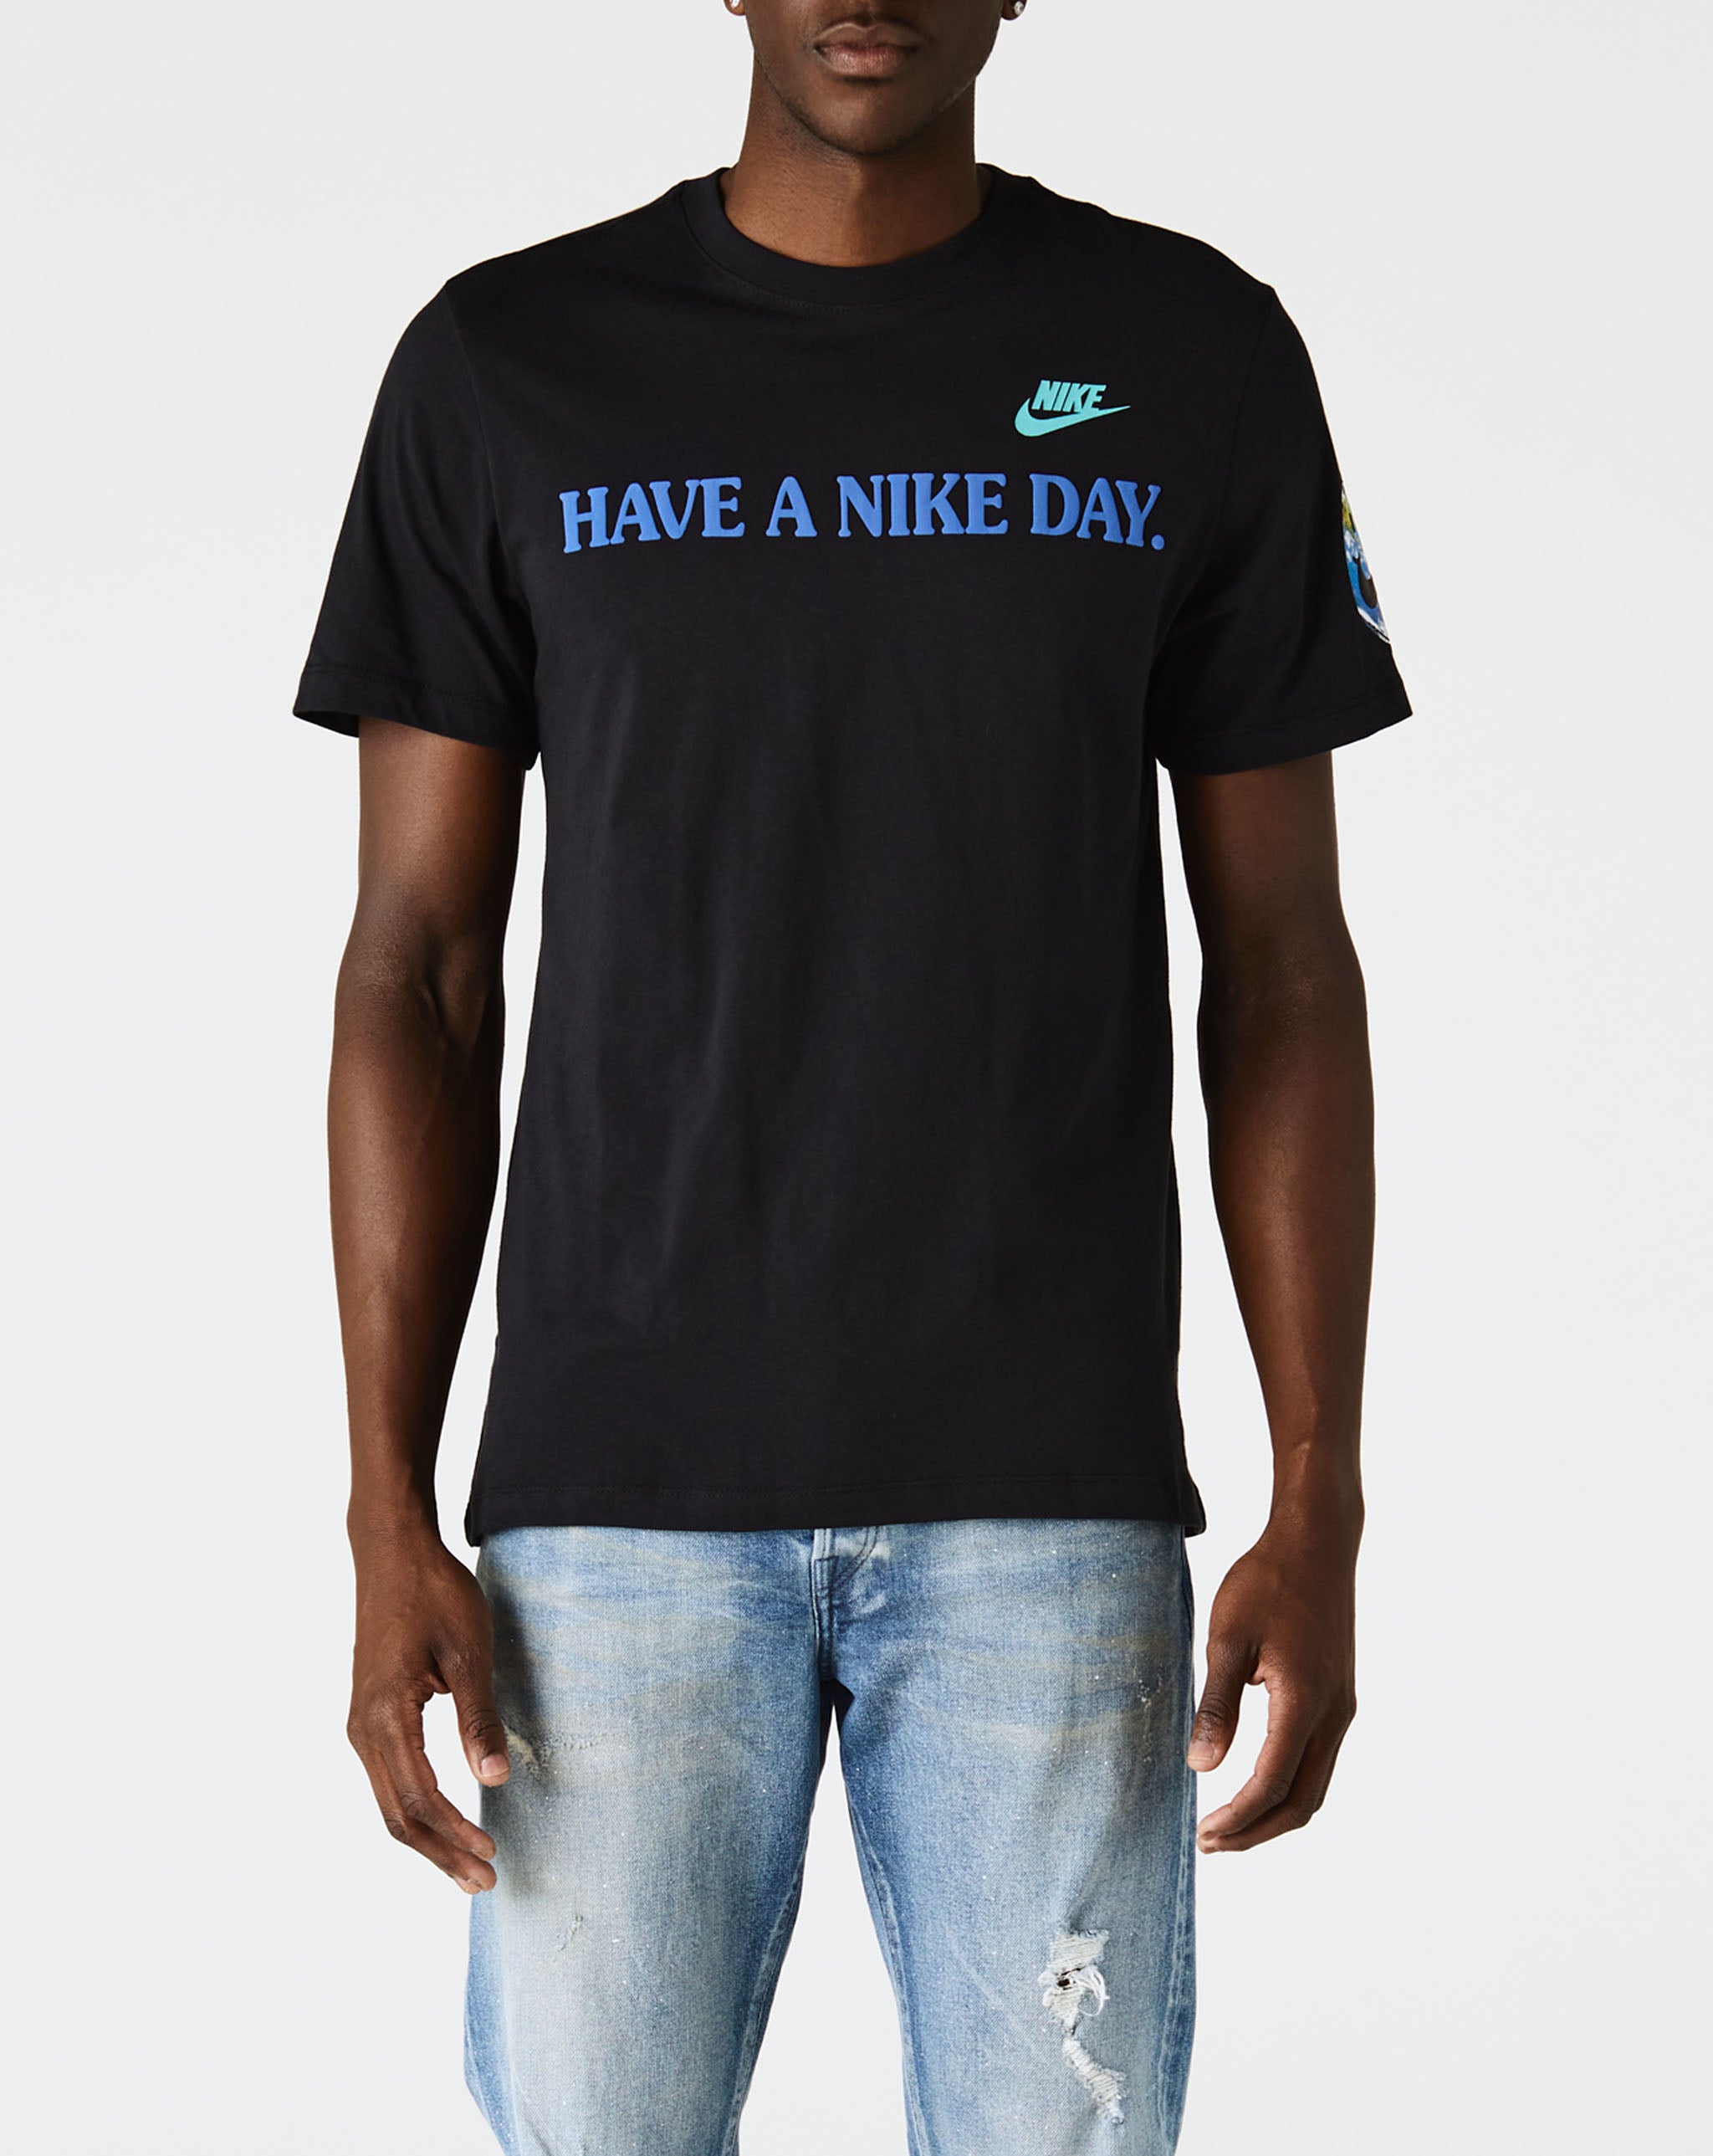 A Nike Day T-Shirt – Rule of Next